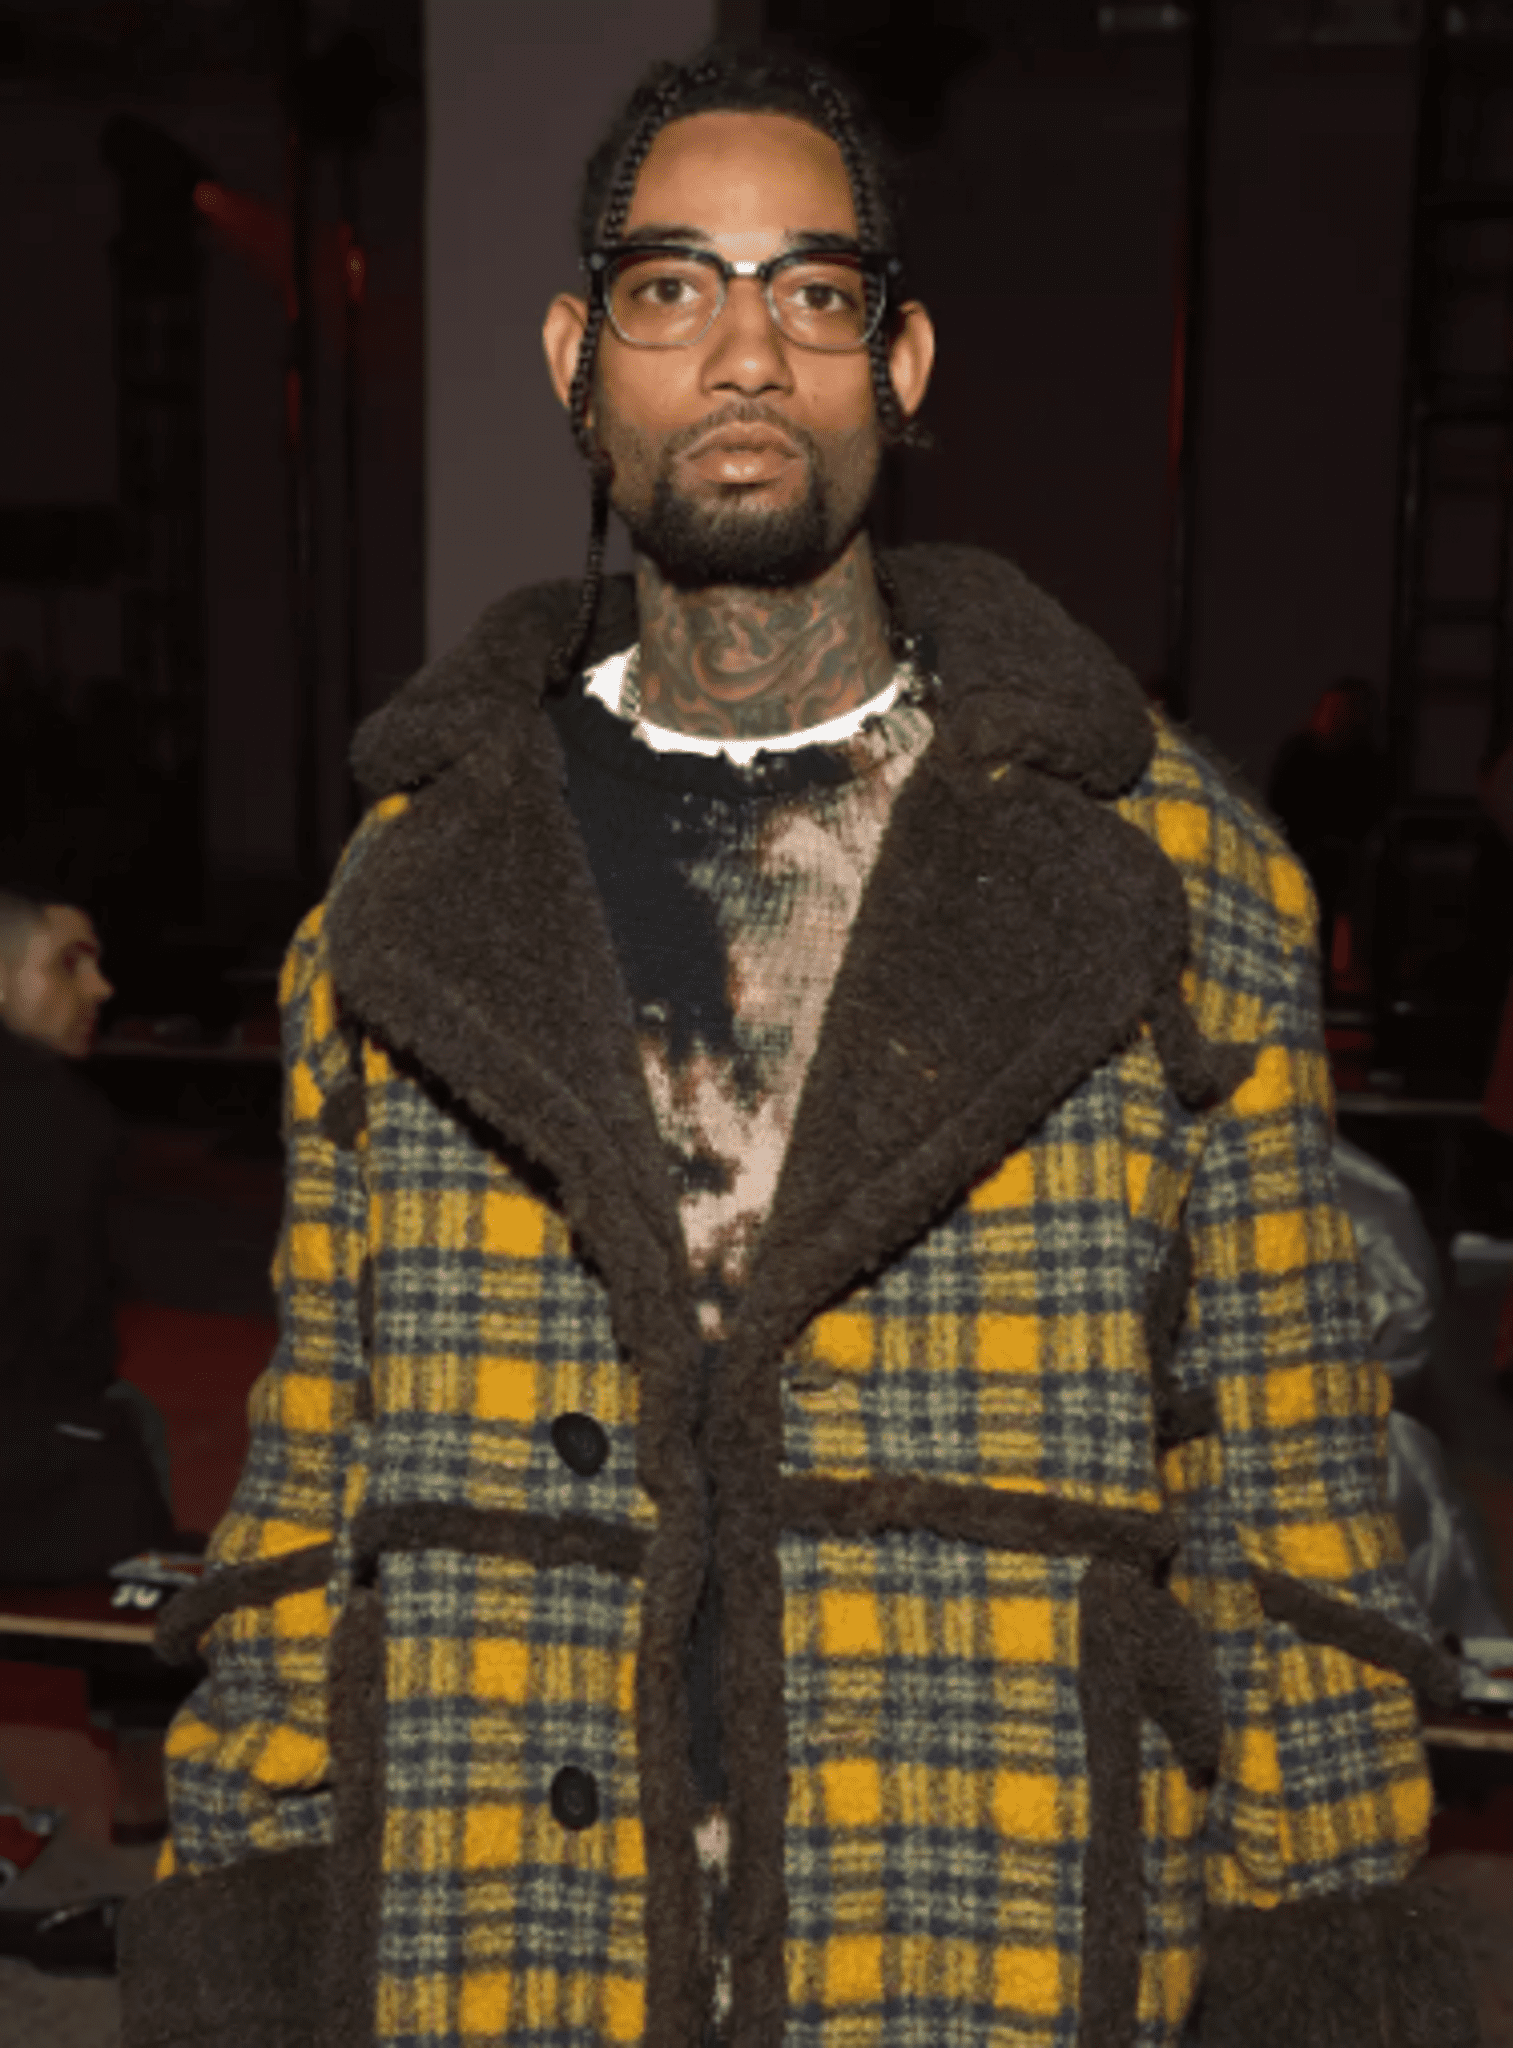 After being attacked, rapper PnB Rock has passed away.